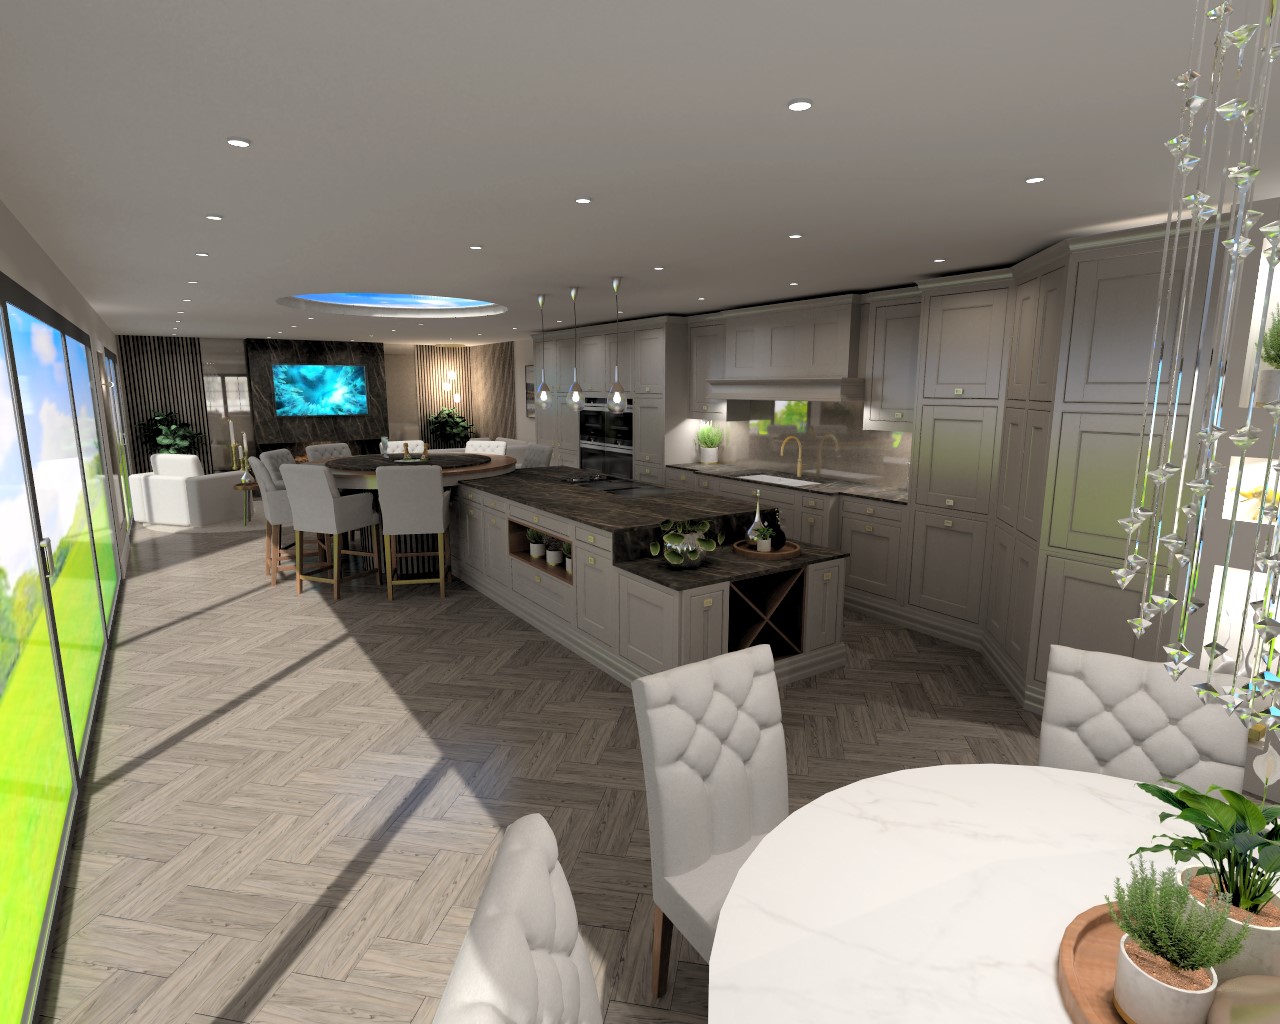 Luxury Kitchen featuring circular bar with lazy susan and champagne cooler 2